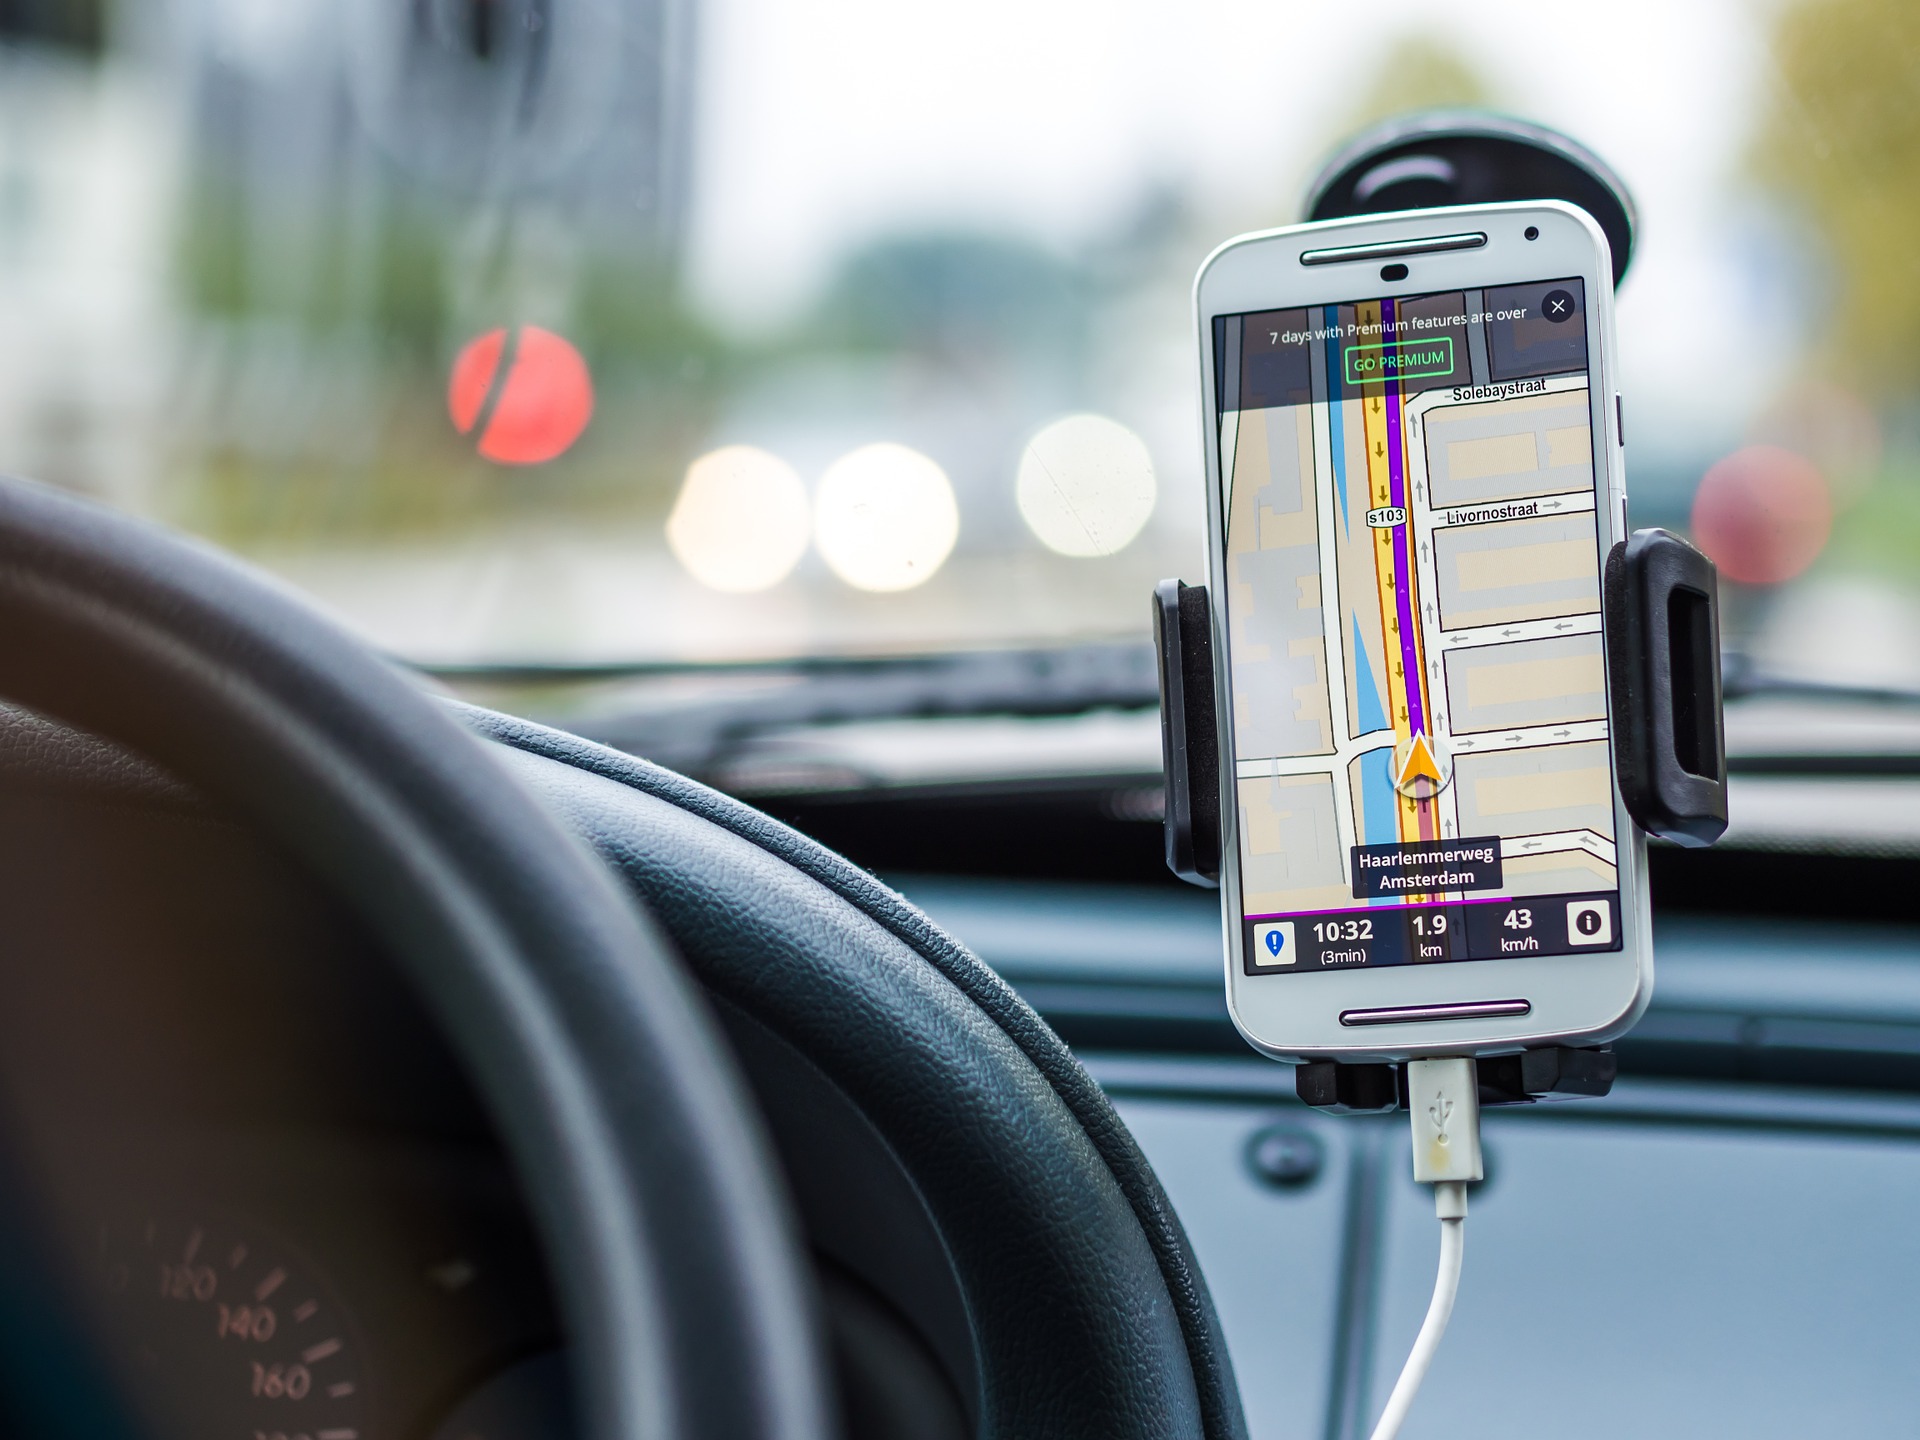 An image that shows a phone mounted sideways of car steering showing navigation